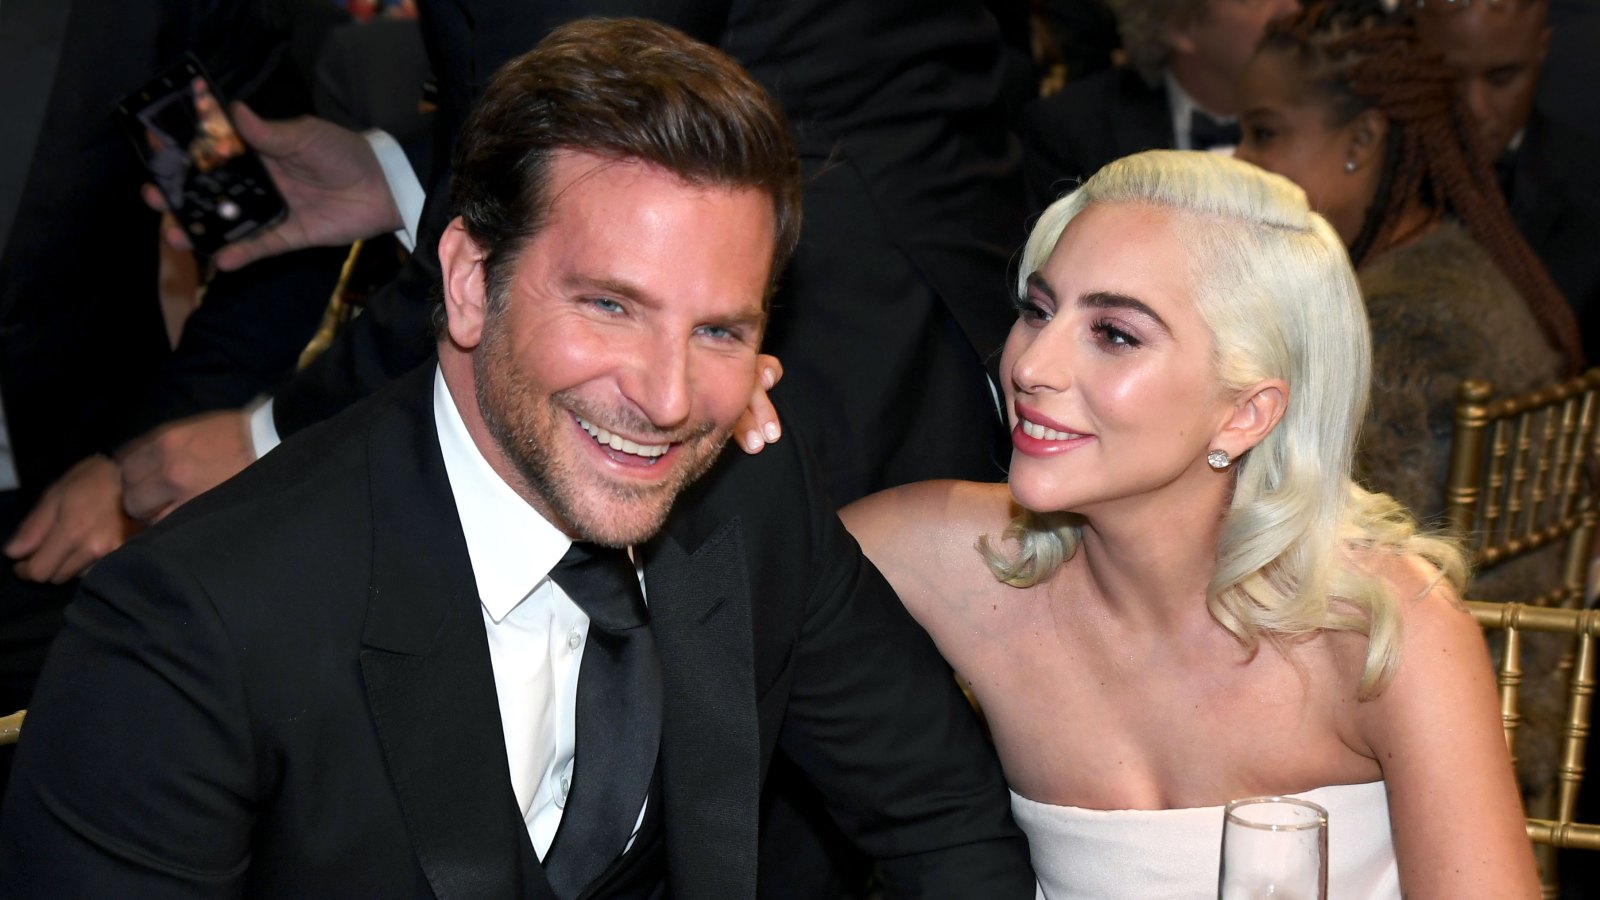 Bradley Cooper Joins Lady Gaga On Stage to Perform ’Shallow’ From 'A Star Is Born' for the First Time Live: Watch!